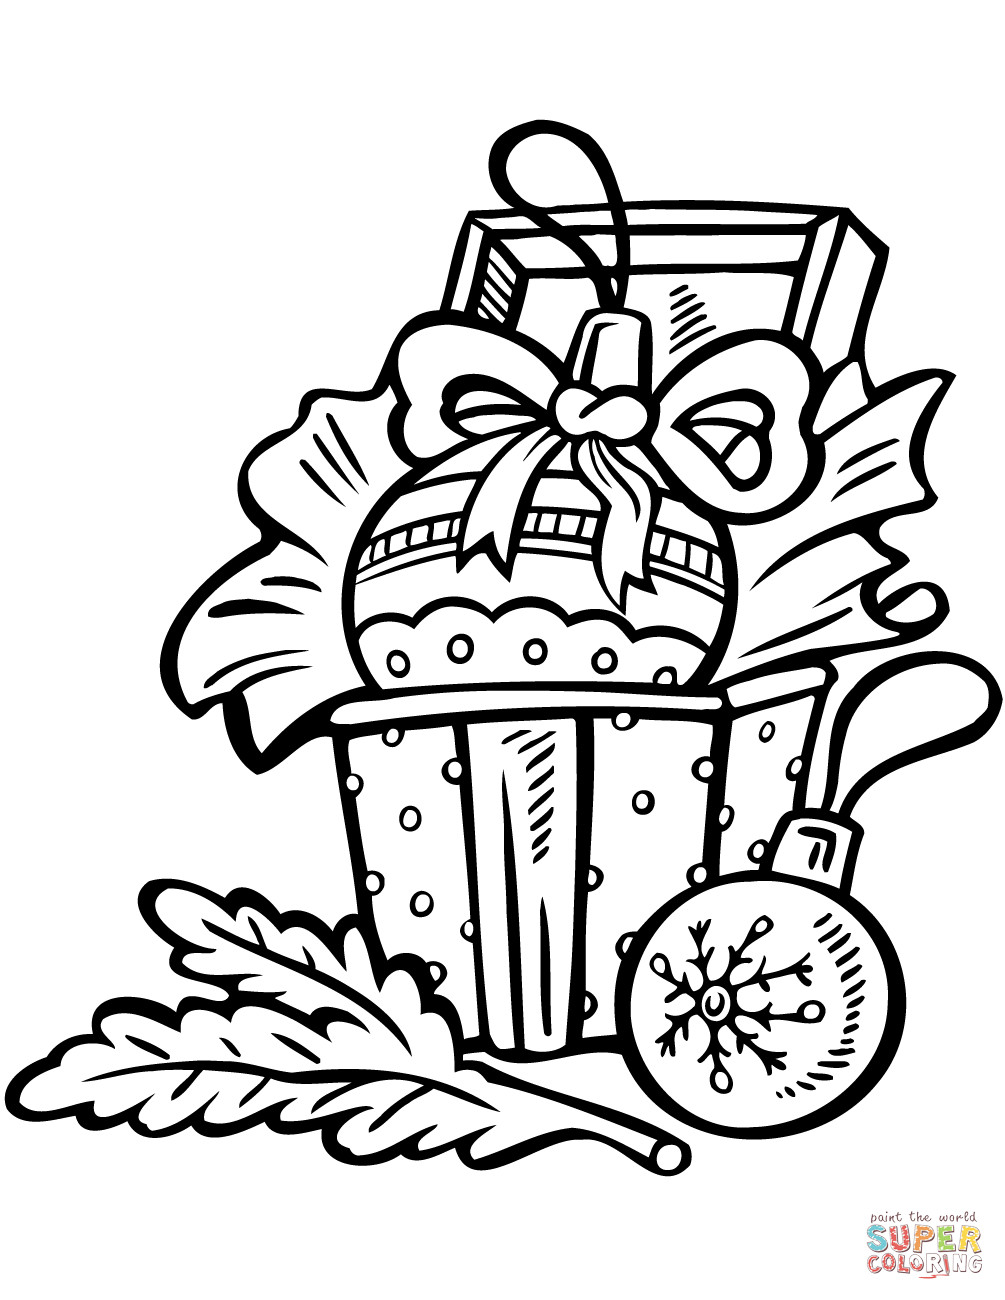 Christmas Ornament Coloring Pages
 Christmas Ornaments coloring page